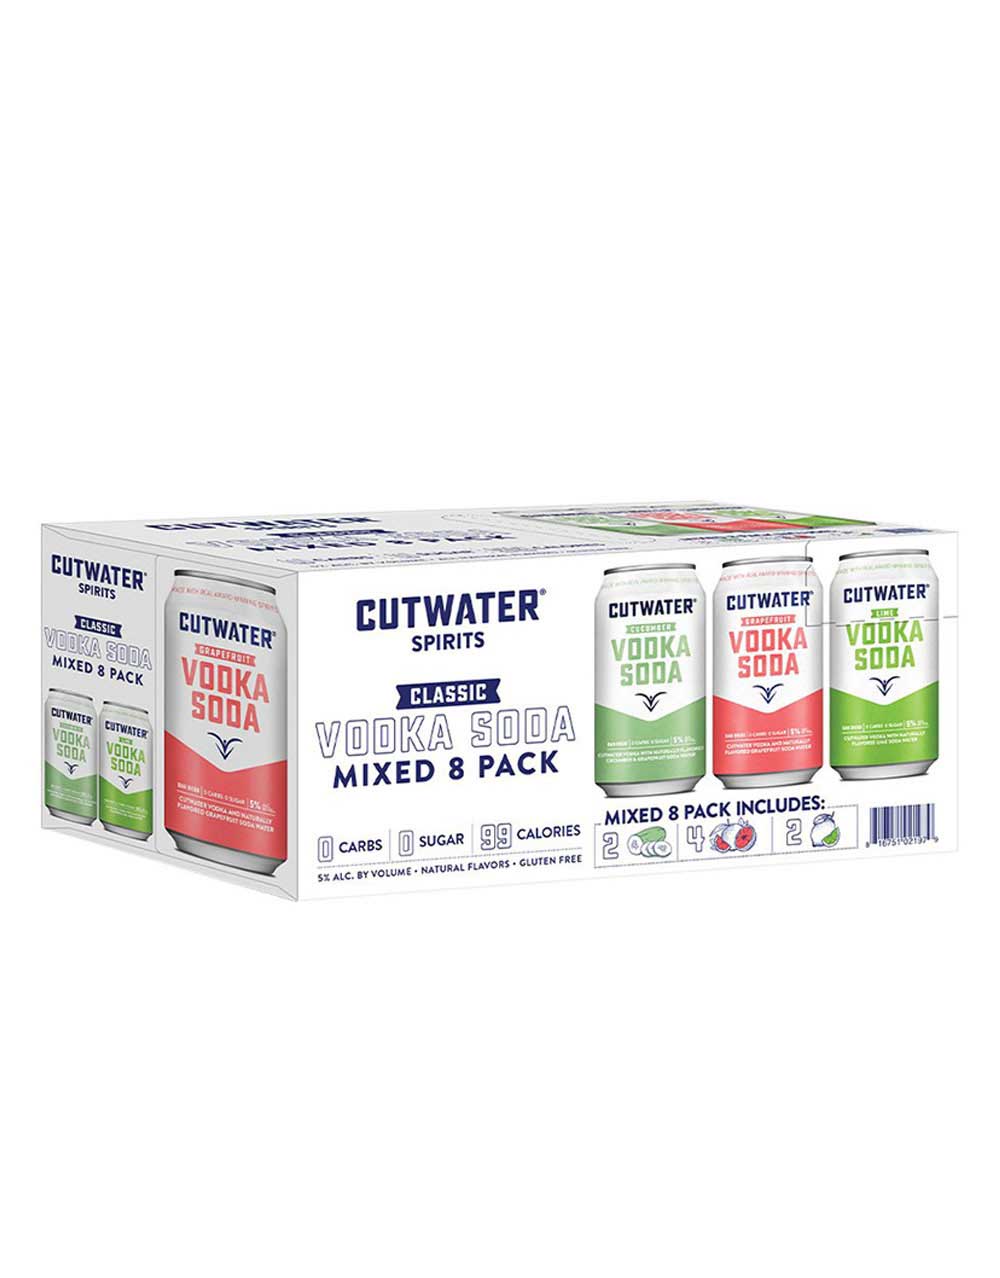 Cutwater Spirits Vodka Soda Variety Pack (8 Pack Cans)